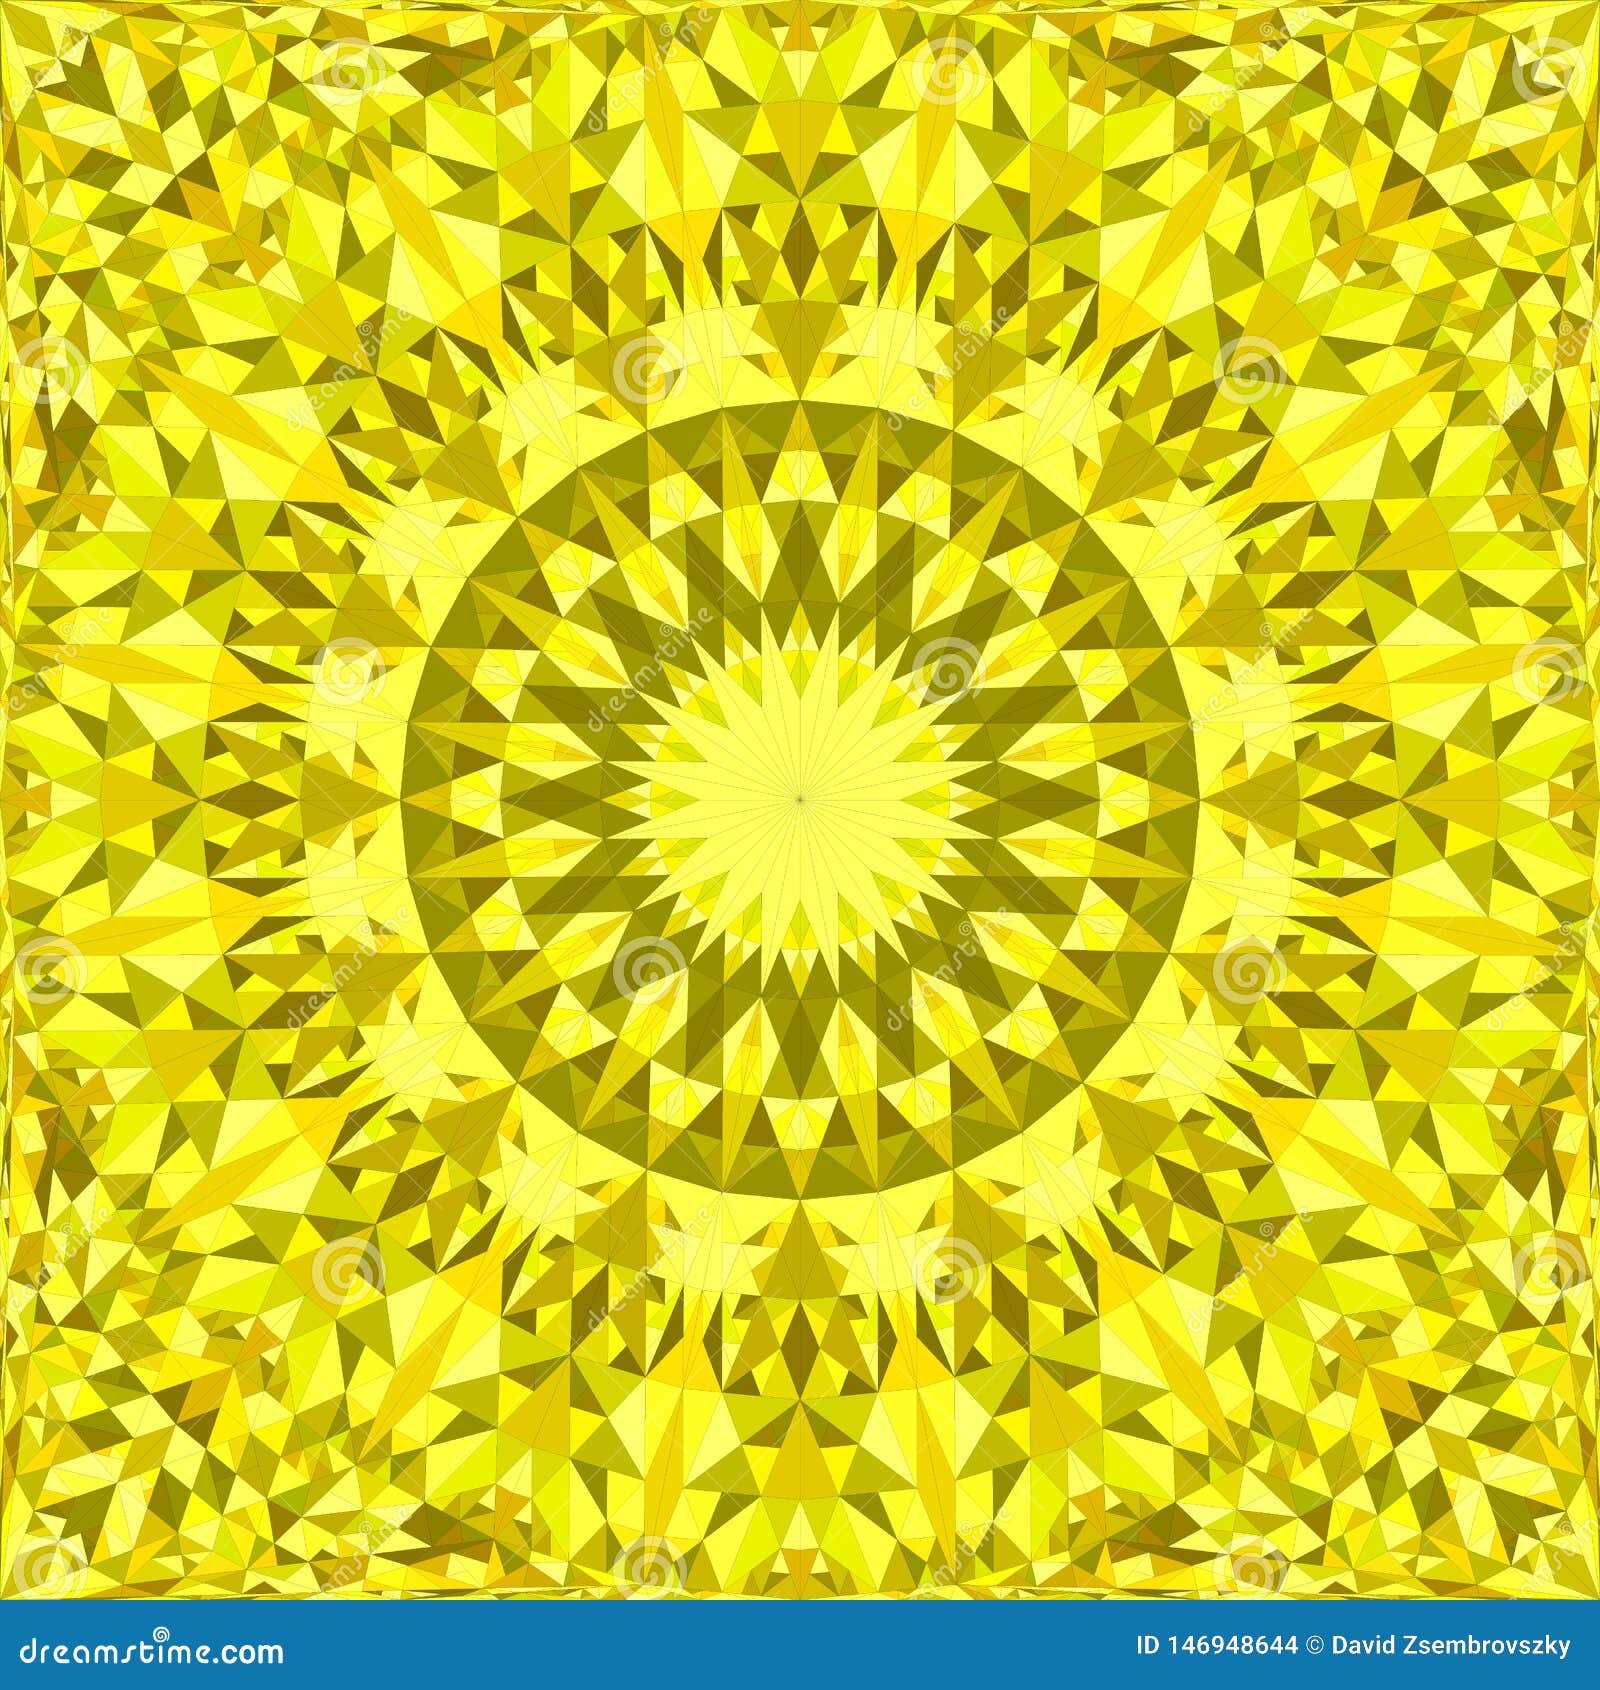 Yellow Repeating Kaleidoscope Pattern Background Design - Abstract Vector Mandala  Wallpaper Illustration from Triangles Stock Vector - Illustration of  polygon, business: 146948644